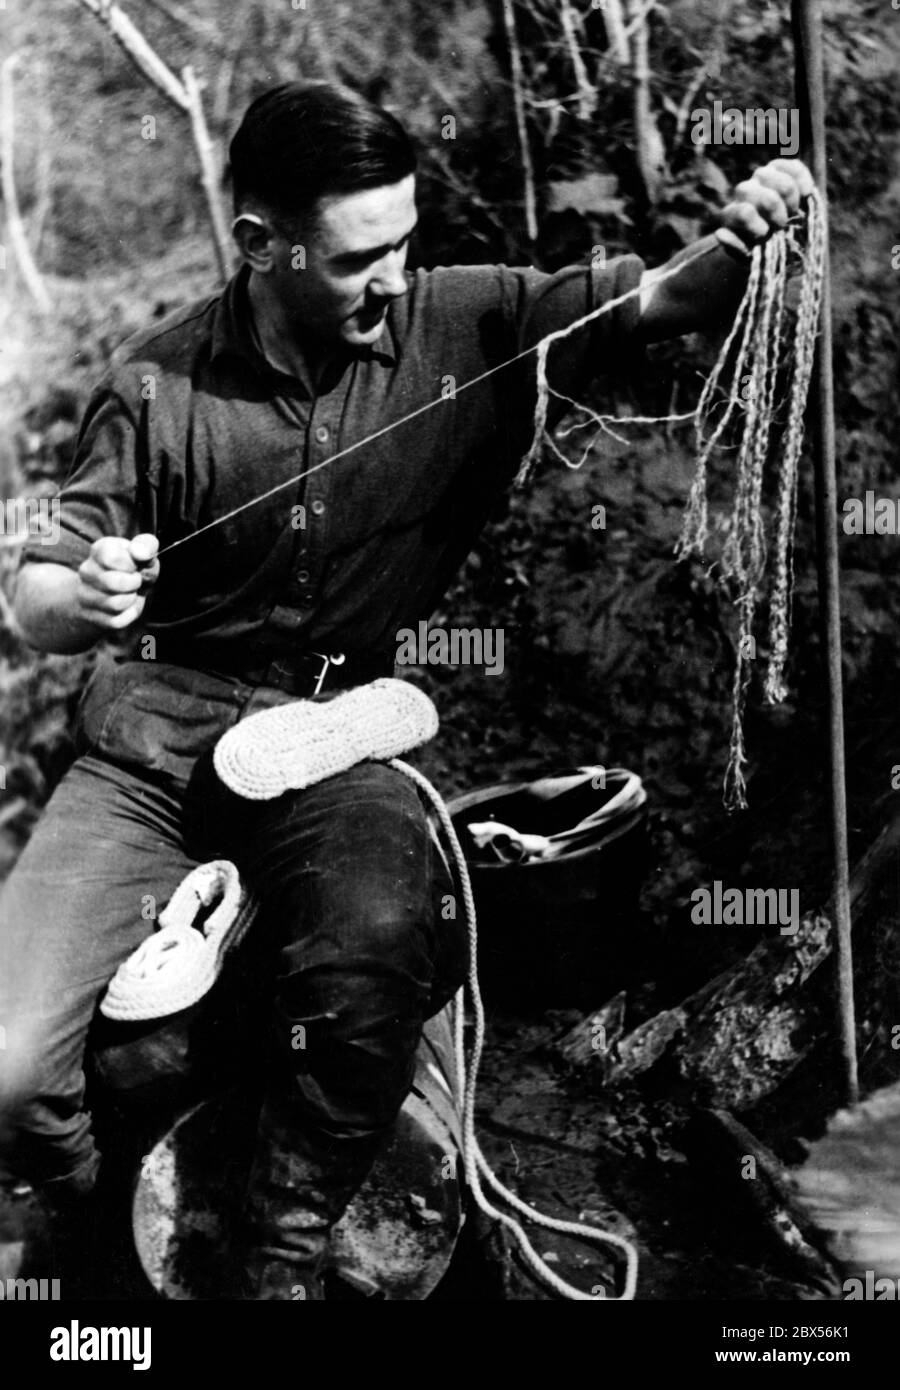 A German soldier makes shoes from the cords of a parachute. During the battle of Kholm, the 'Kampfgruppe Scherer' successfully defended the town for 105 days. (A photo of the Propaganda Company (PK) by war correspondent Richard Muck, who flew into the pocket at the beginning of March). Stock Photo